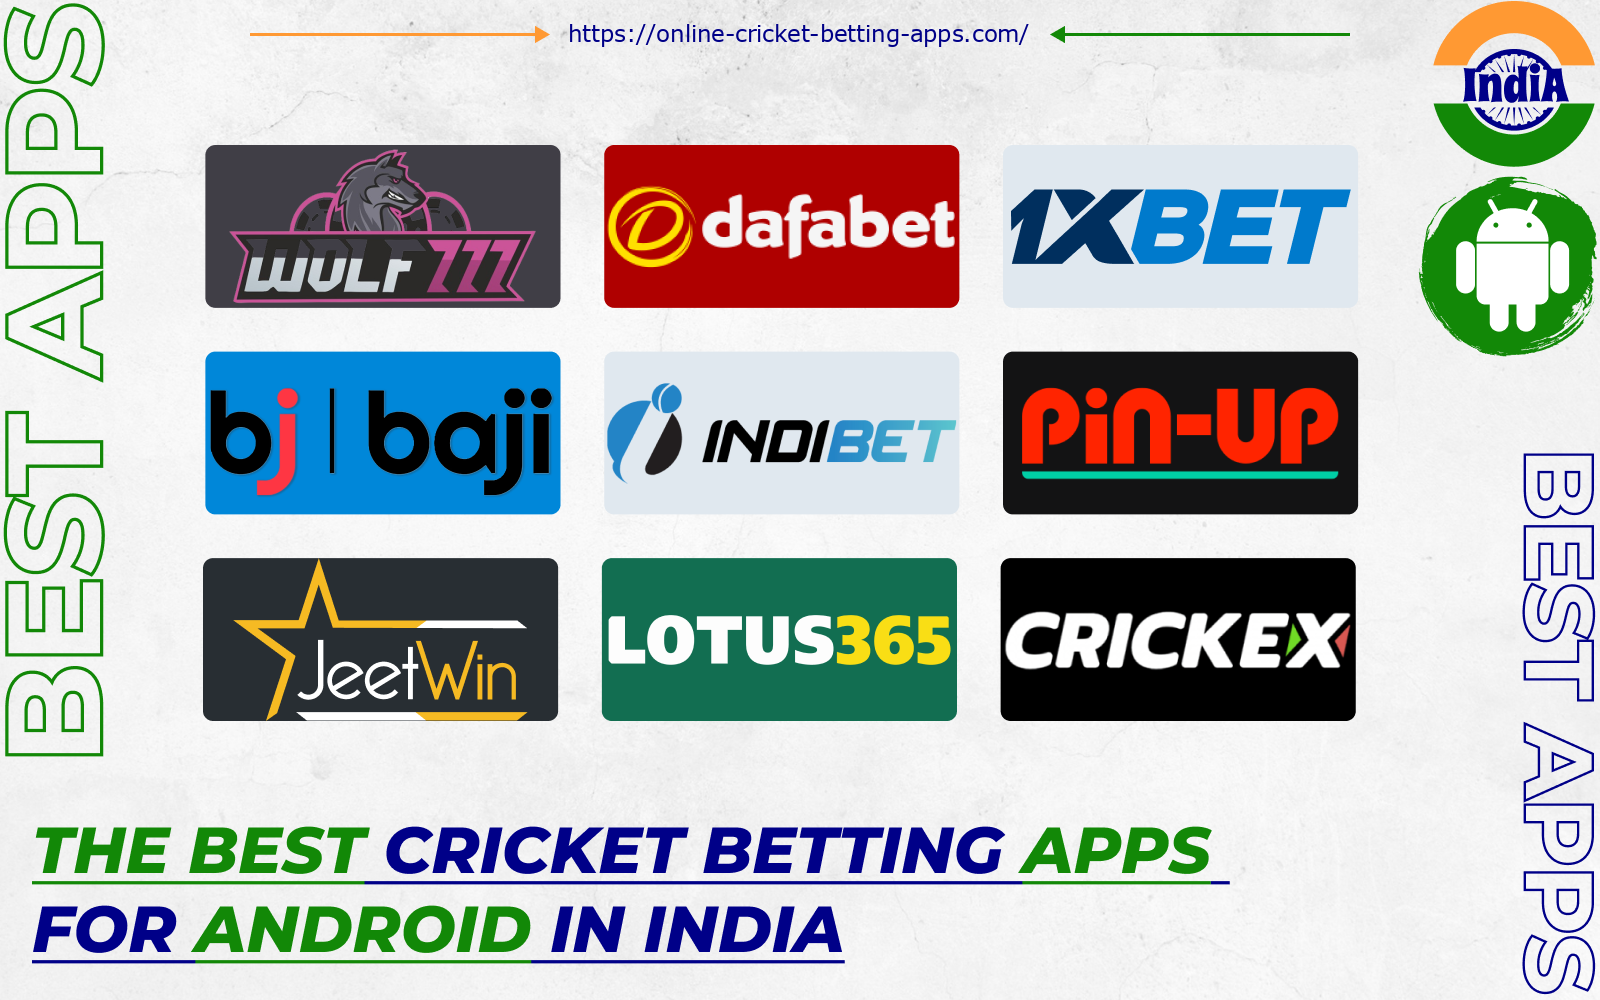 Understanding the popularity of Android devices in India, bookmakers are trying their best to optimise the cricket betting app to run fast and lag-free